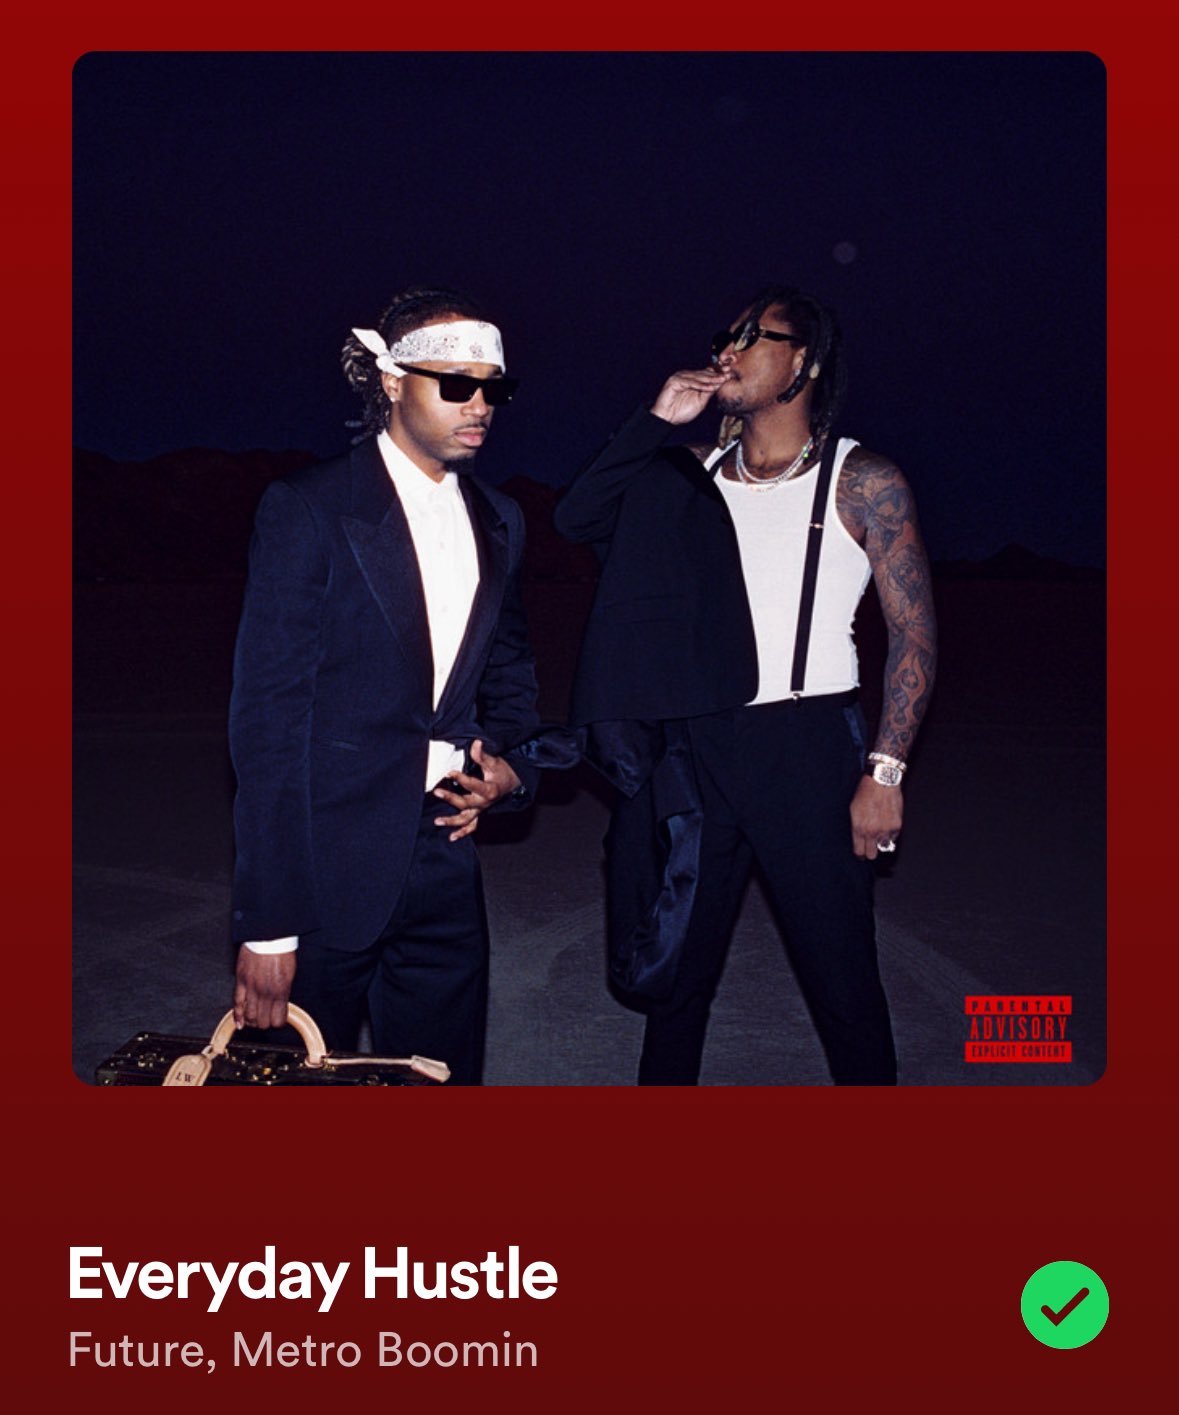 Tervis Scoot on X: Should've known a track named “Everyday Hustle